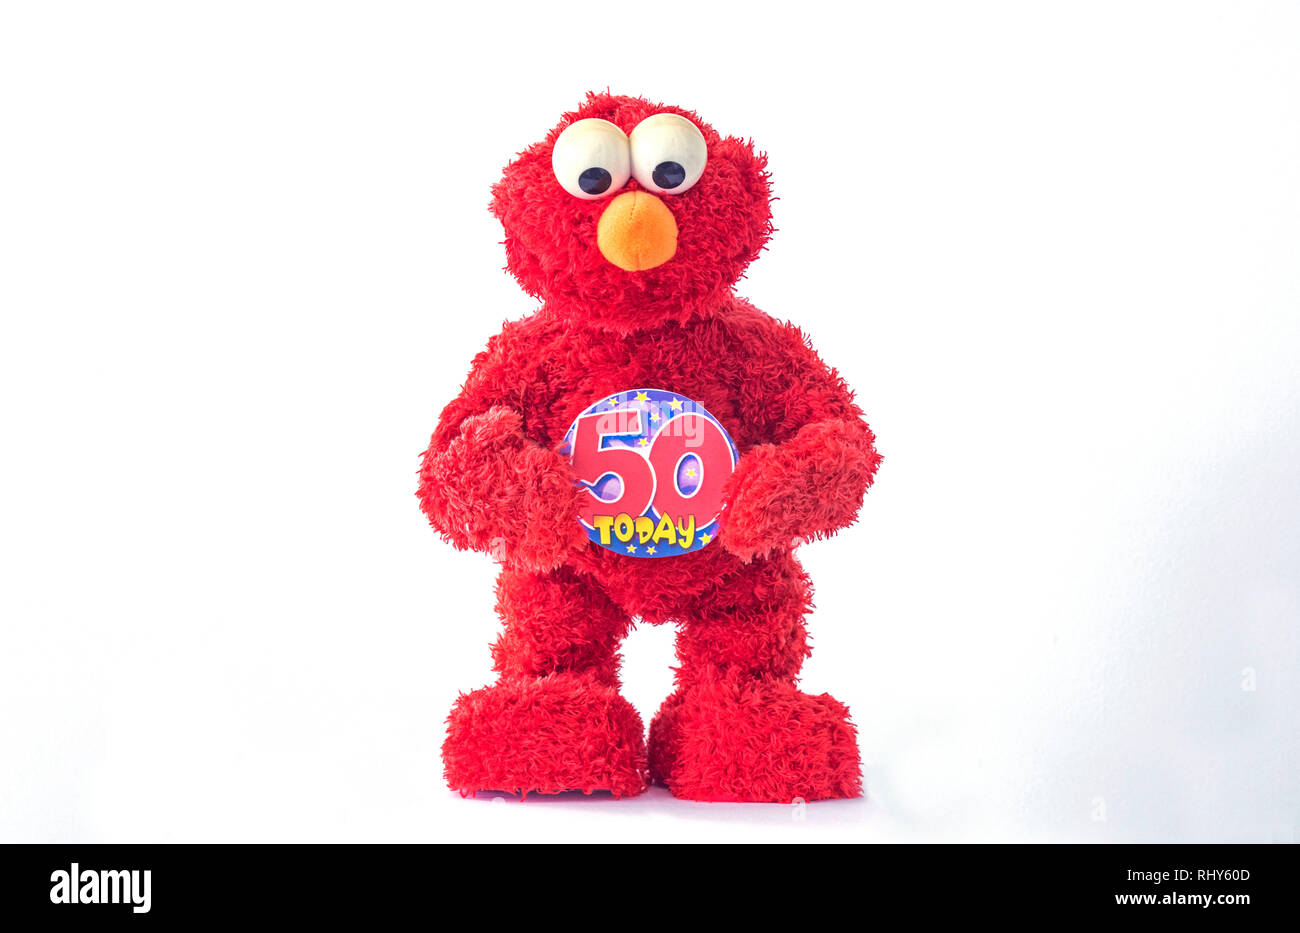 A toy of Elmo, the Muppet character on Sesame Street holding a 50th birthday badge. The children's television show is fifty years old in 2019. Stock Photo